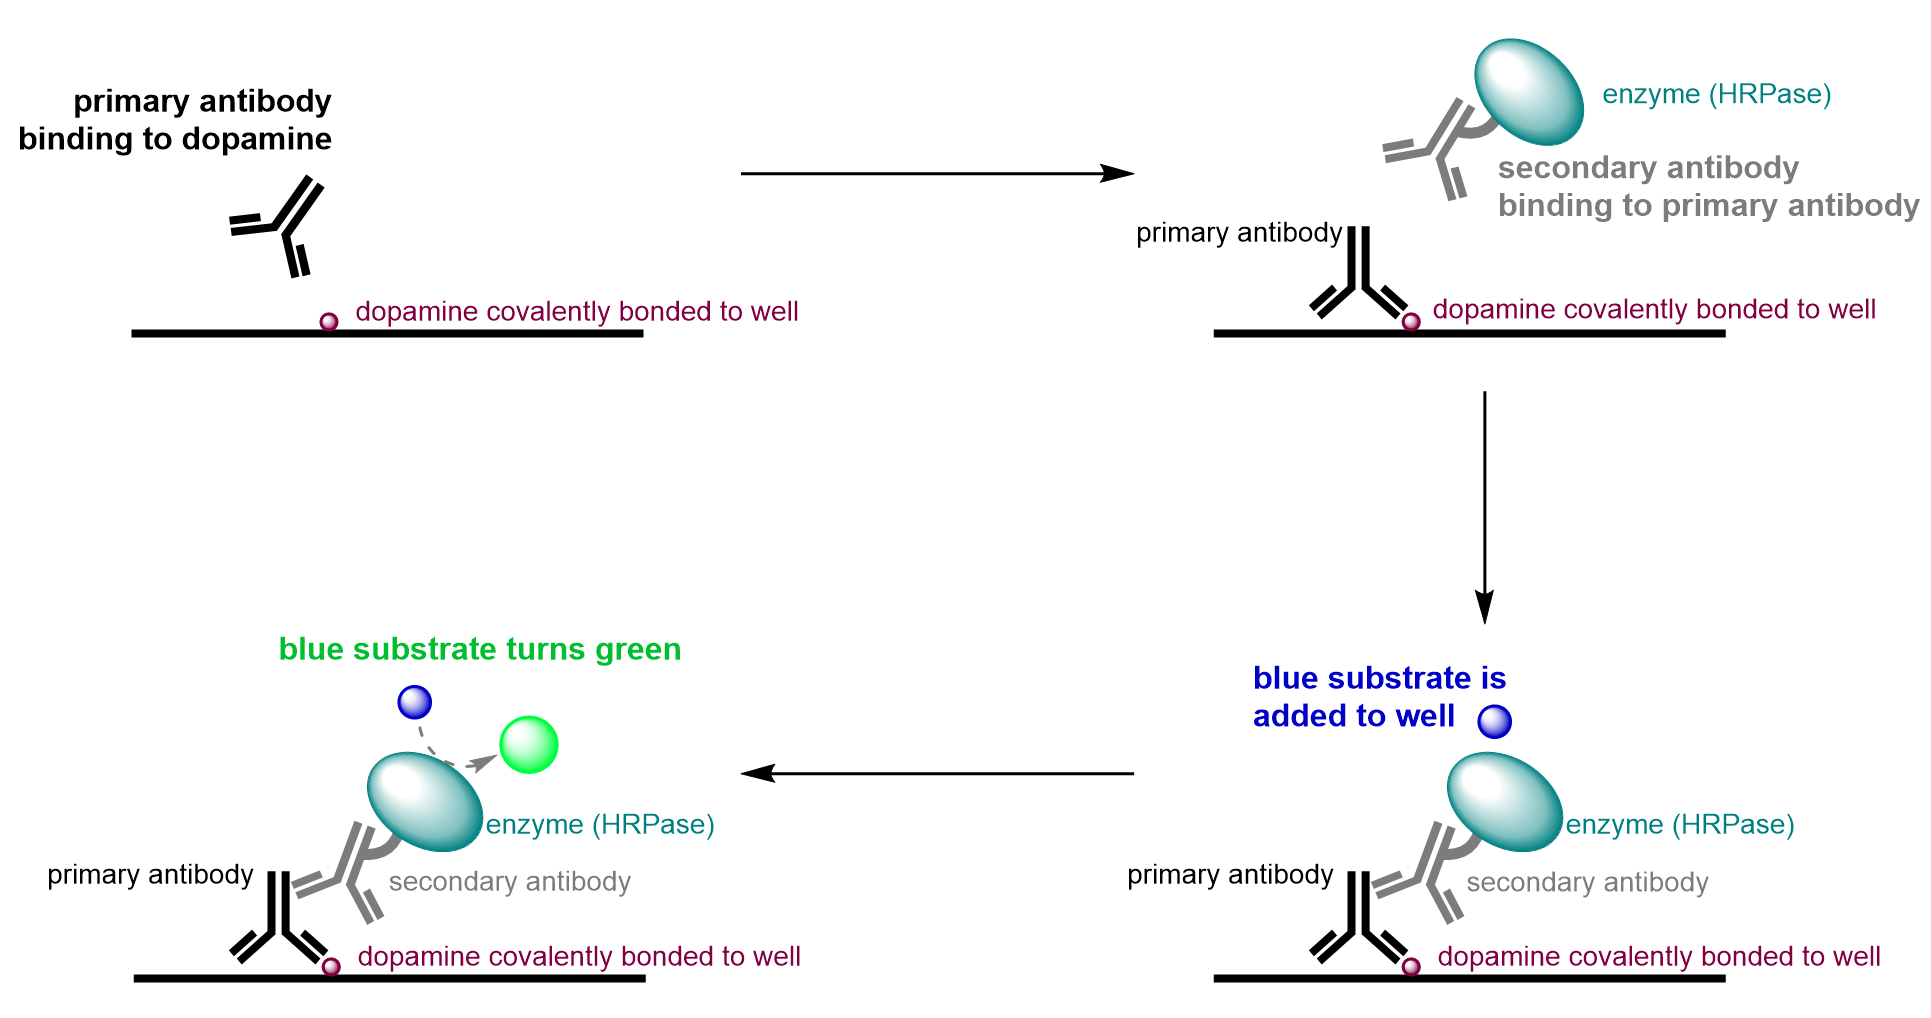 An overview for how an ELISA functions. A primary antibody first targets and binds to dopamine. In the second step, a secondary antibody, which contains the enzyme horseradish peroxidase, is added to bind to the primary antibody. In the third step, a blue solution is added to the well, which turns green due to the enzyme, indicating the presence of dopamine.